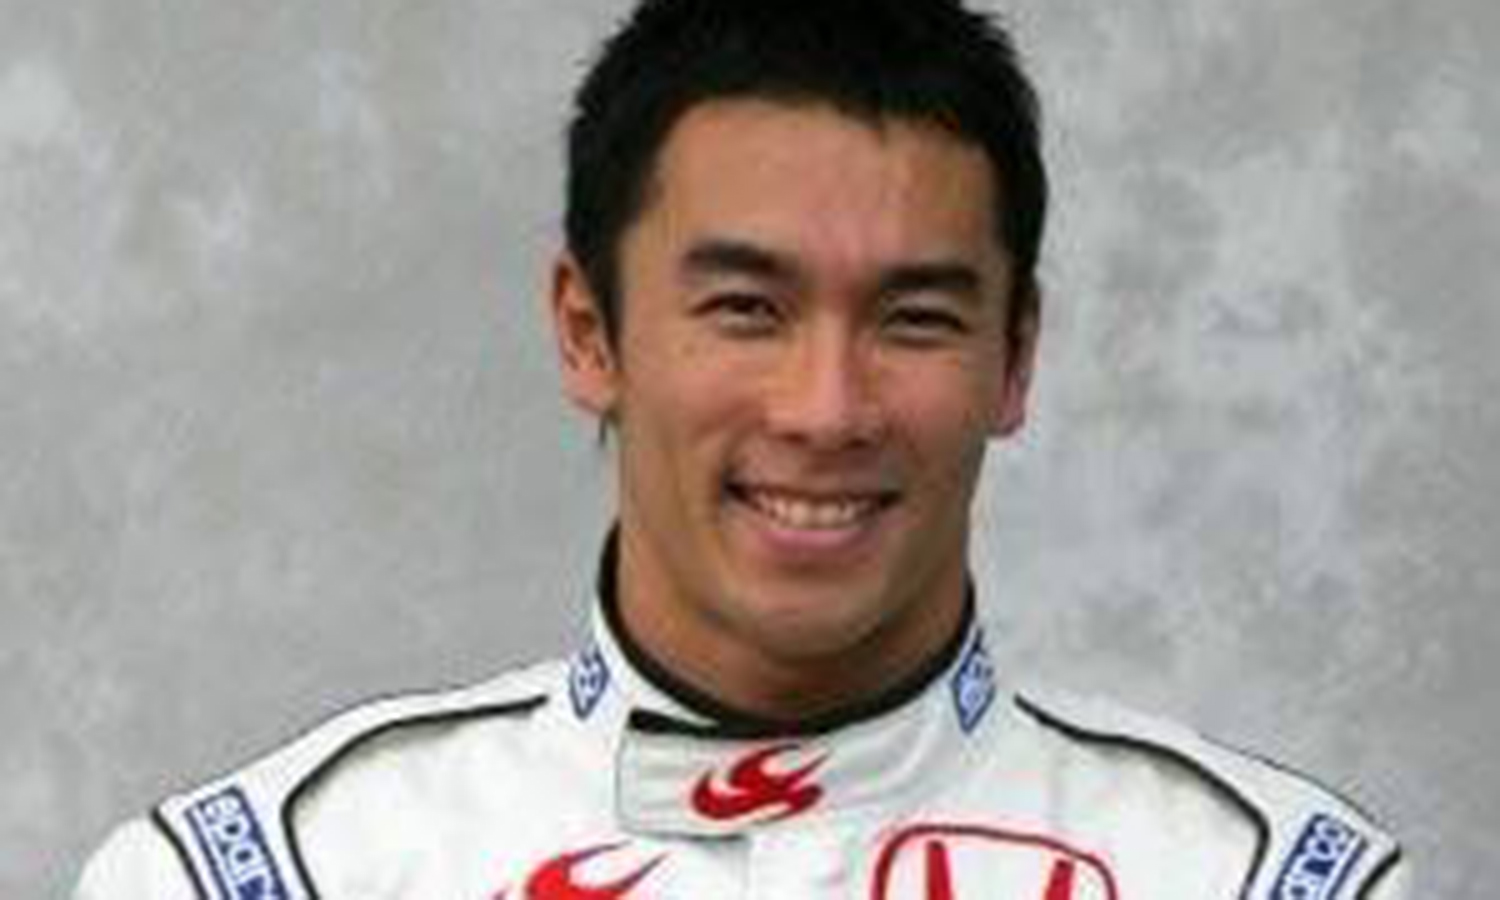 Takuma Sato is the first Japanese driver in history to win an IndyCar series race